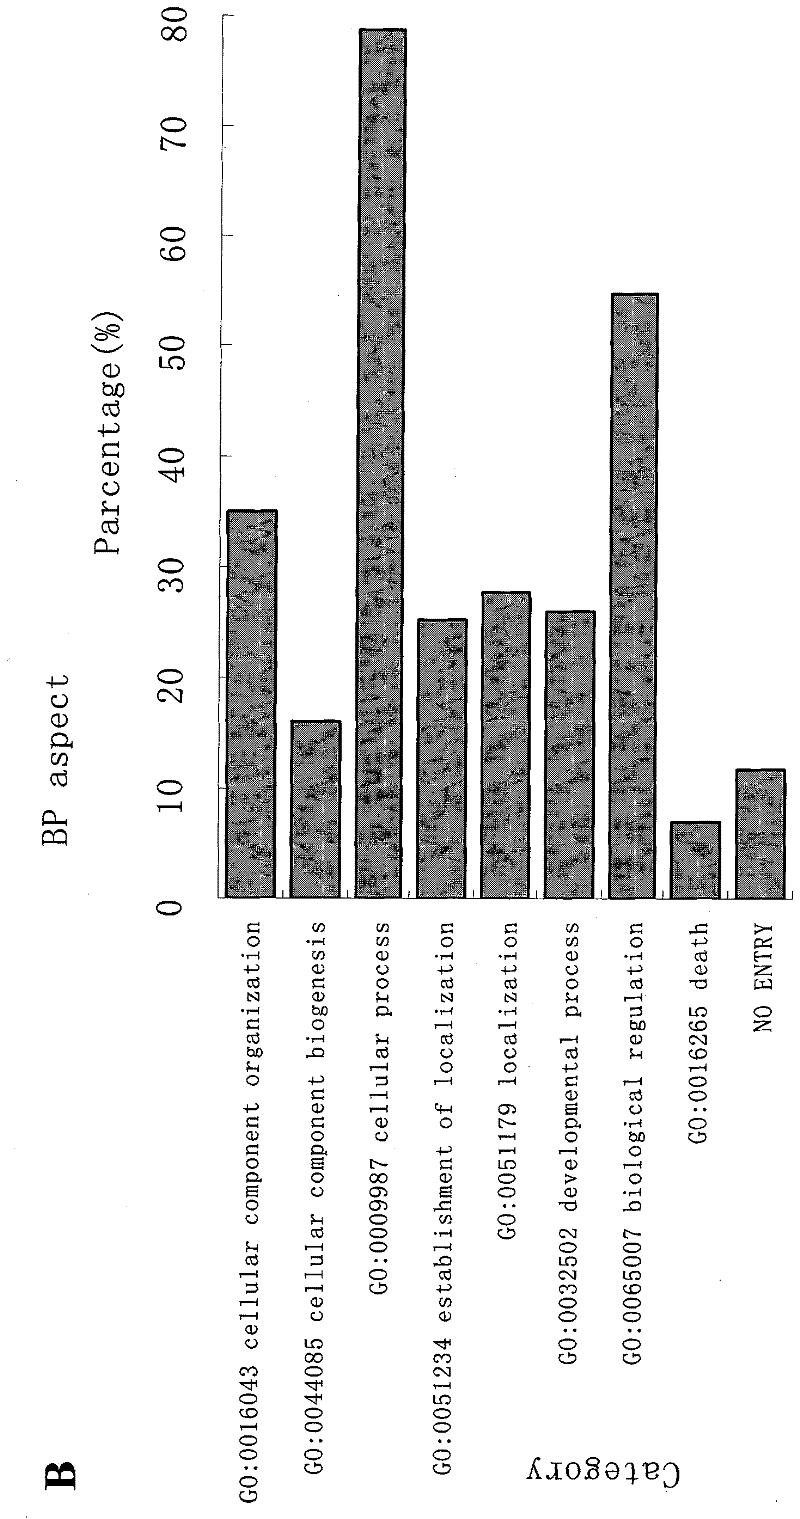 Oligoden droglioma (OG) marker MAP2 (microtubuleassociated protein 2) protein and use thereof